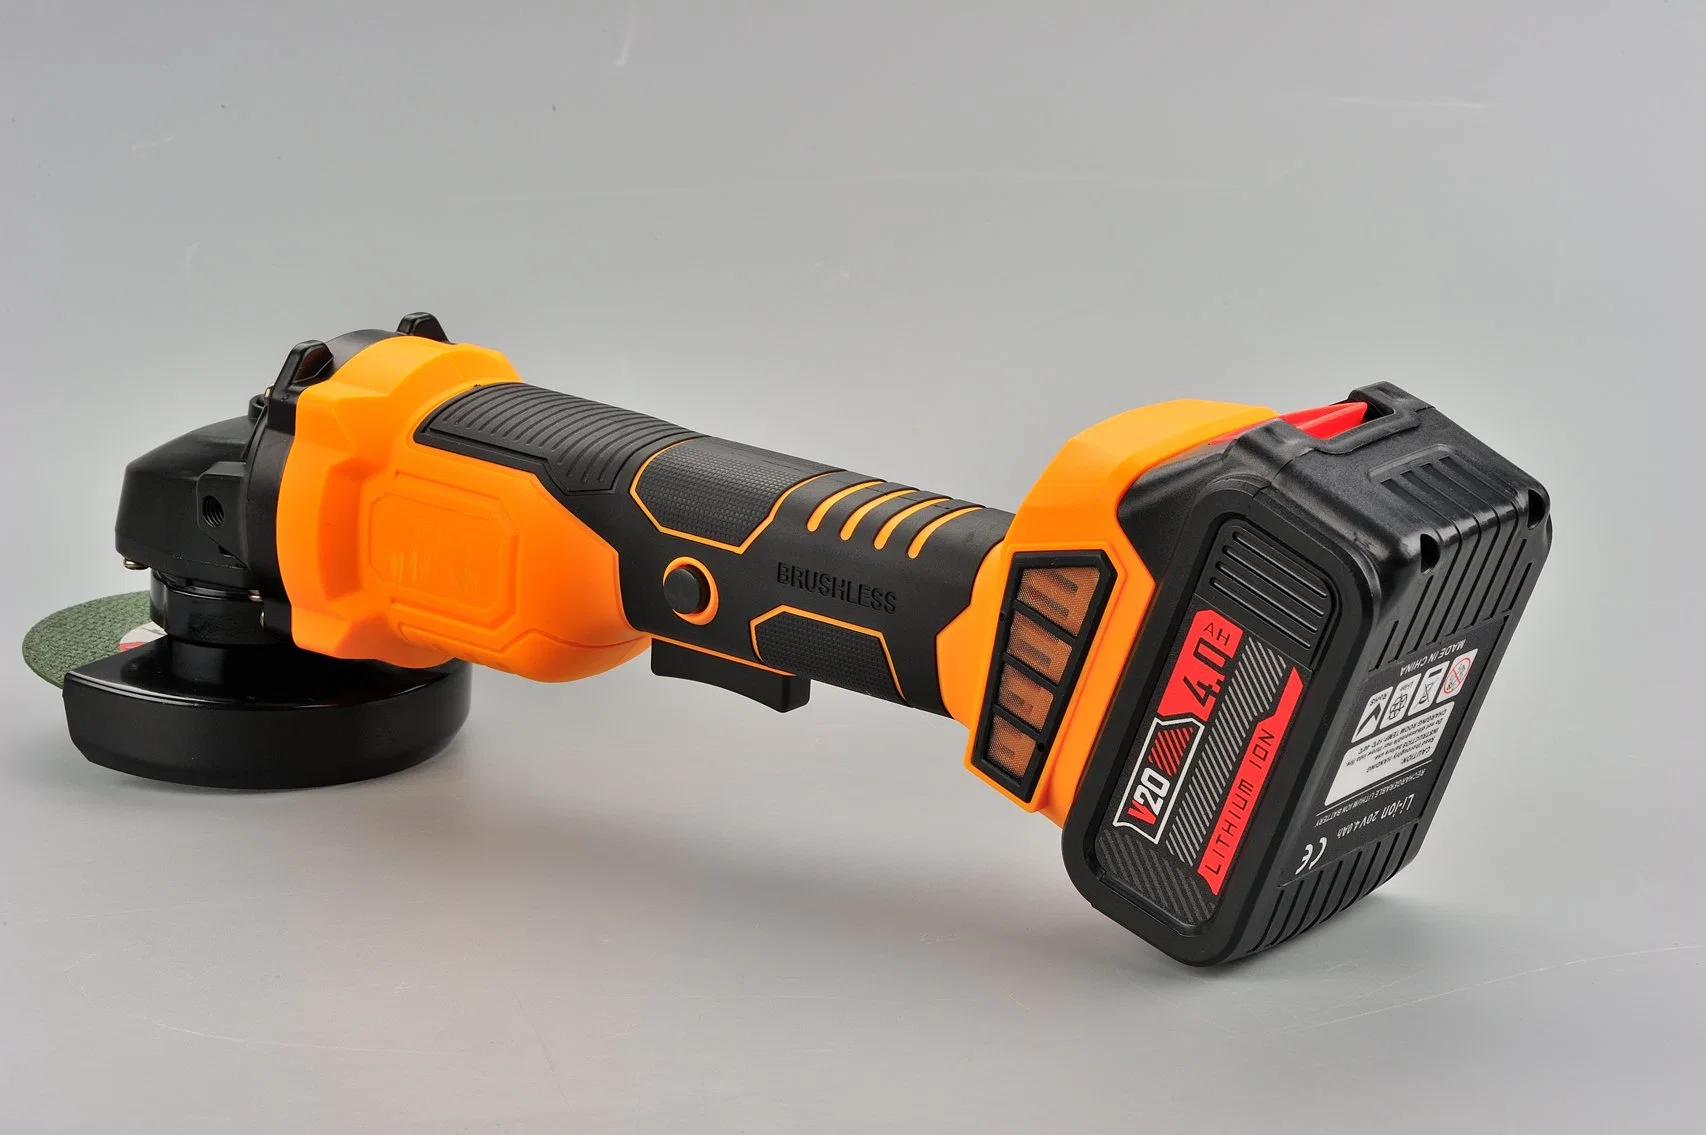 Portable Power Tools 18V / 20V Brushless Cordless Angle Grinder 115mm Electric Cut off Machine Total Angle Grinder